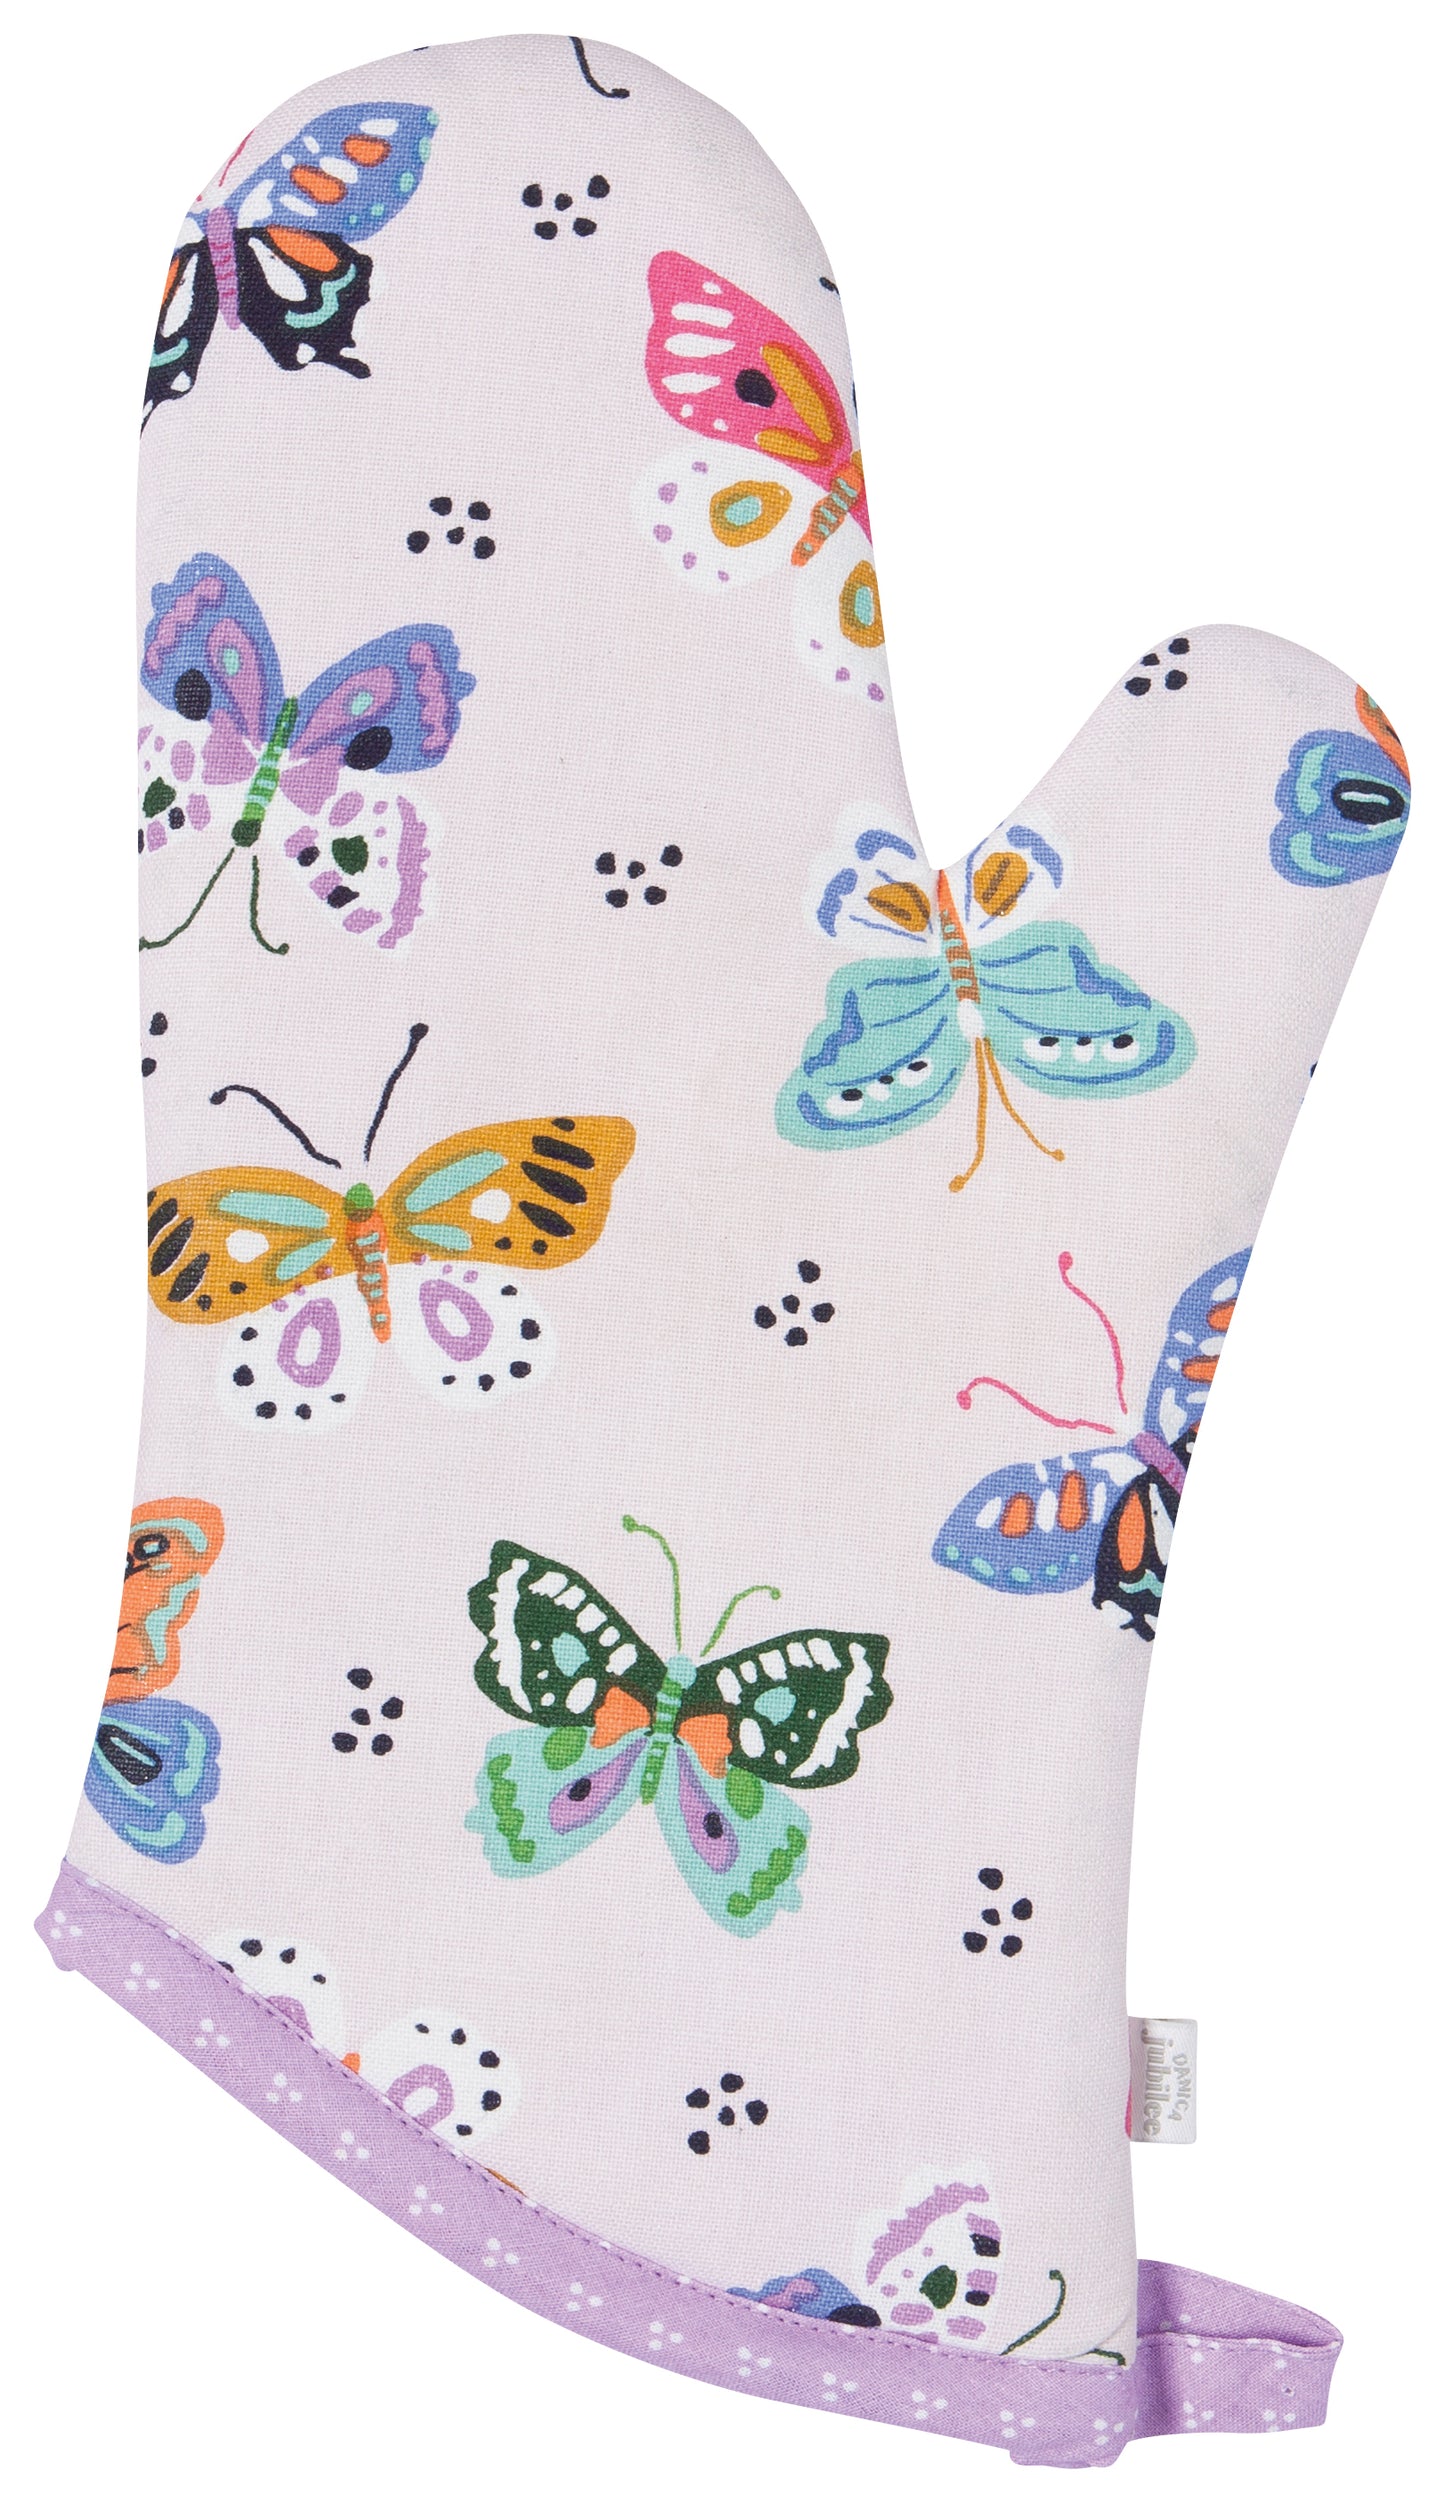 Butterfly Oven Mitts - Set of 2